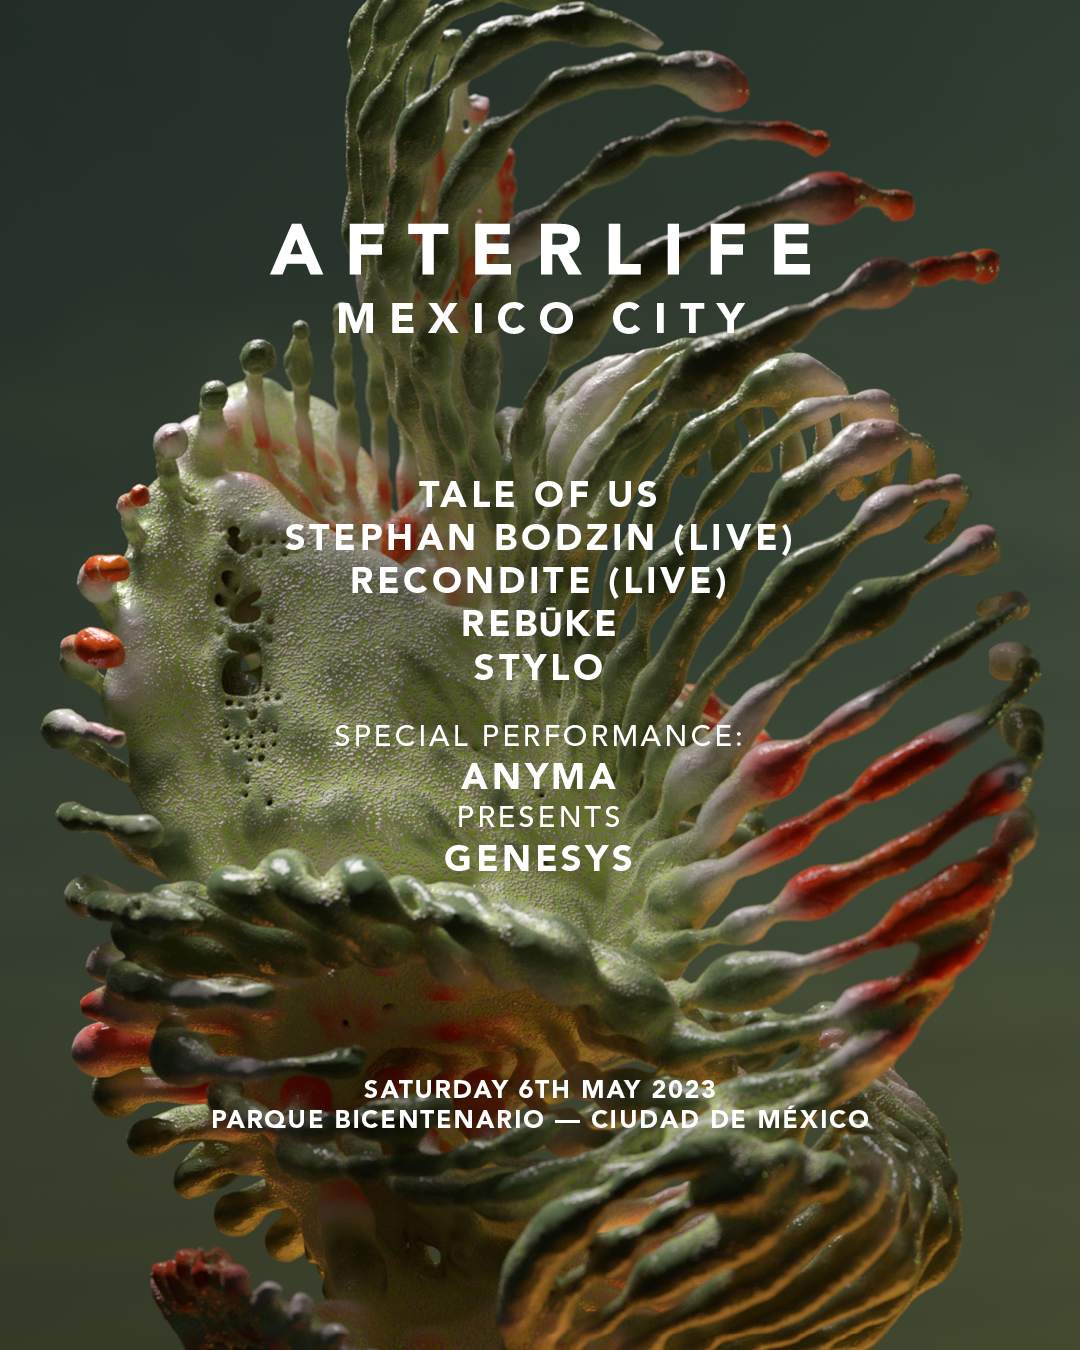 Afterlife Mexico City 2023 - フライヤー裏